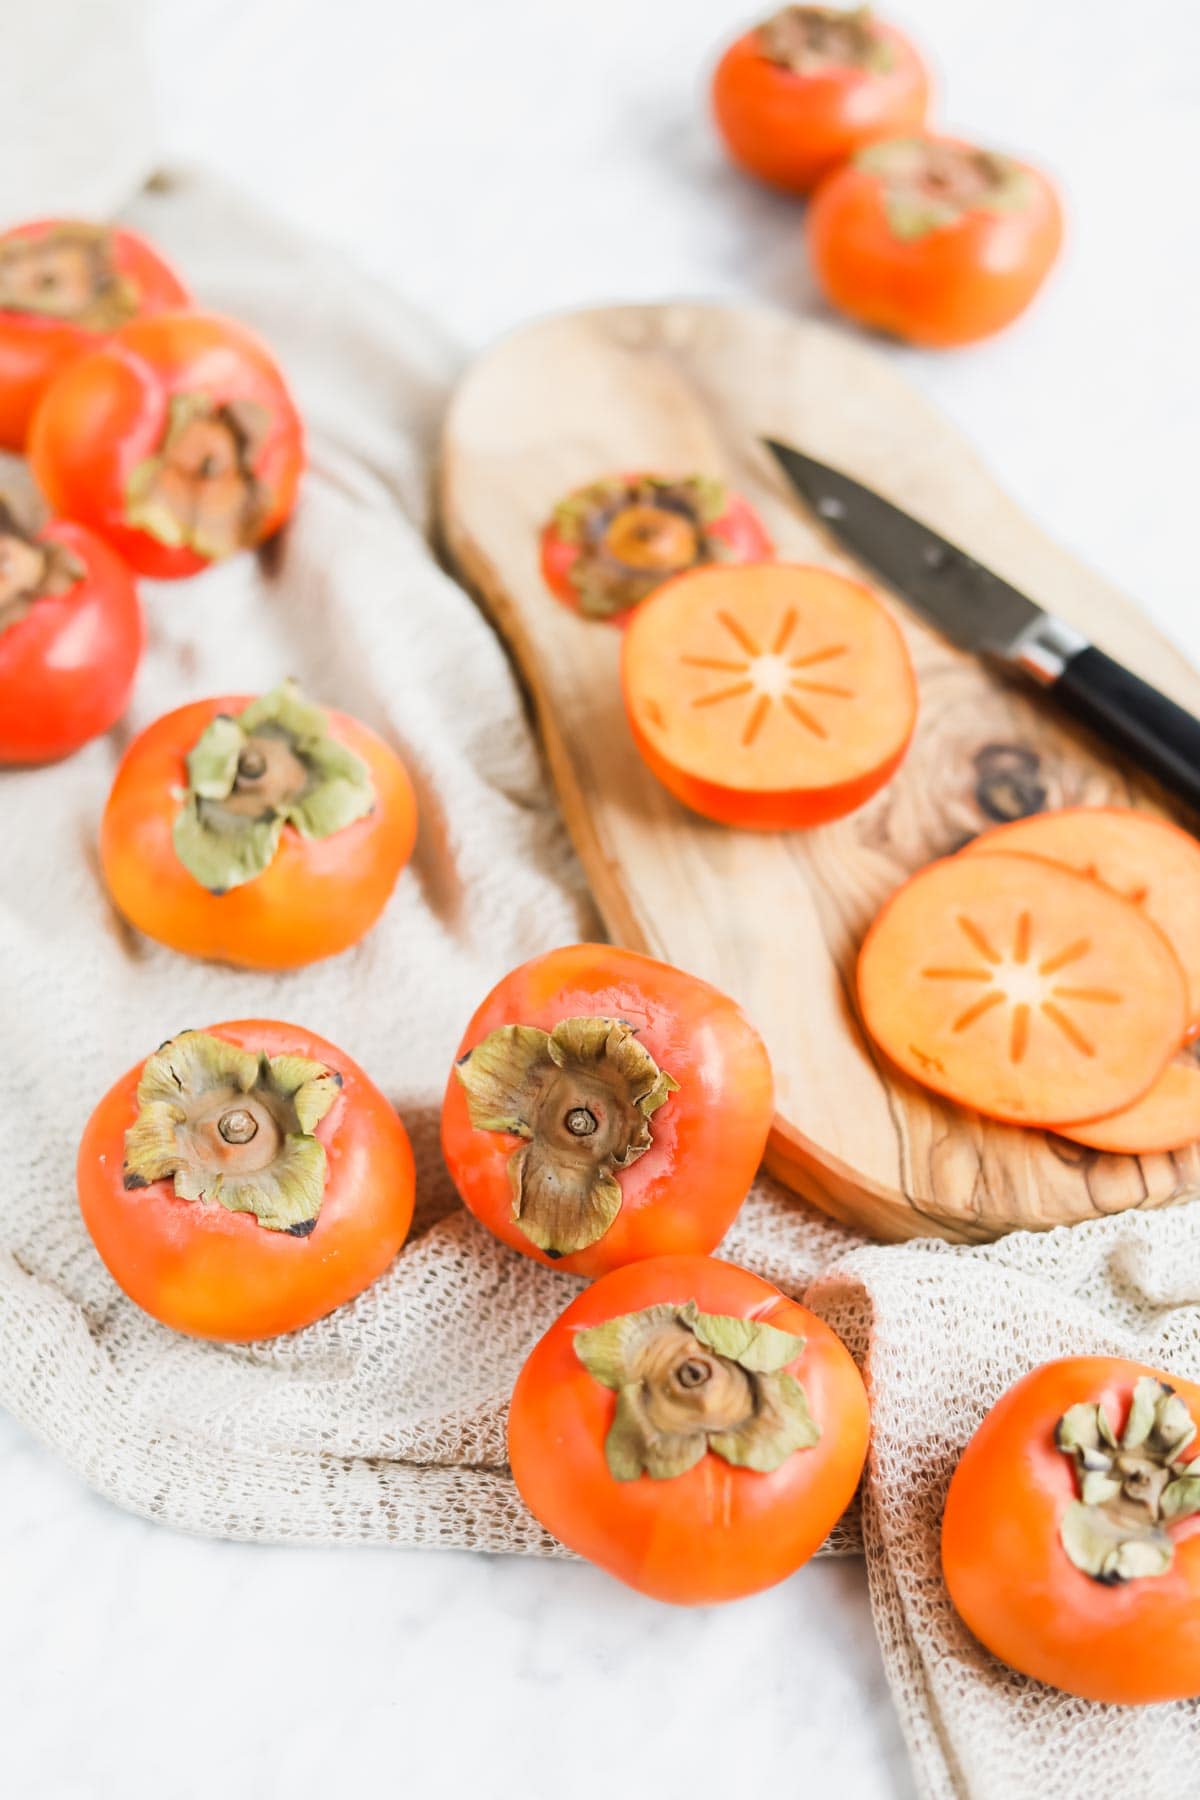 Chopped persimmons on cutting board.